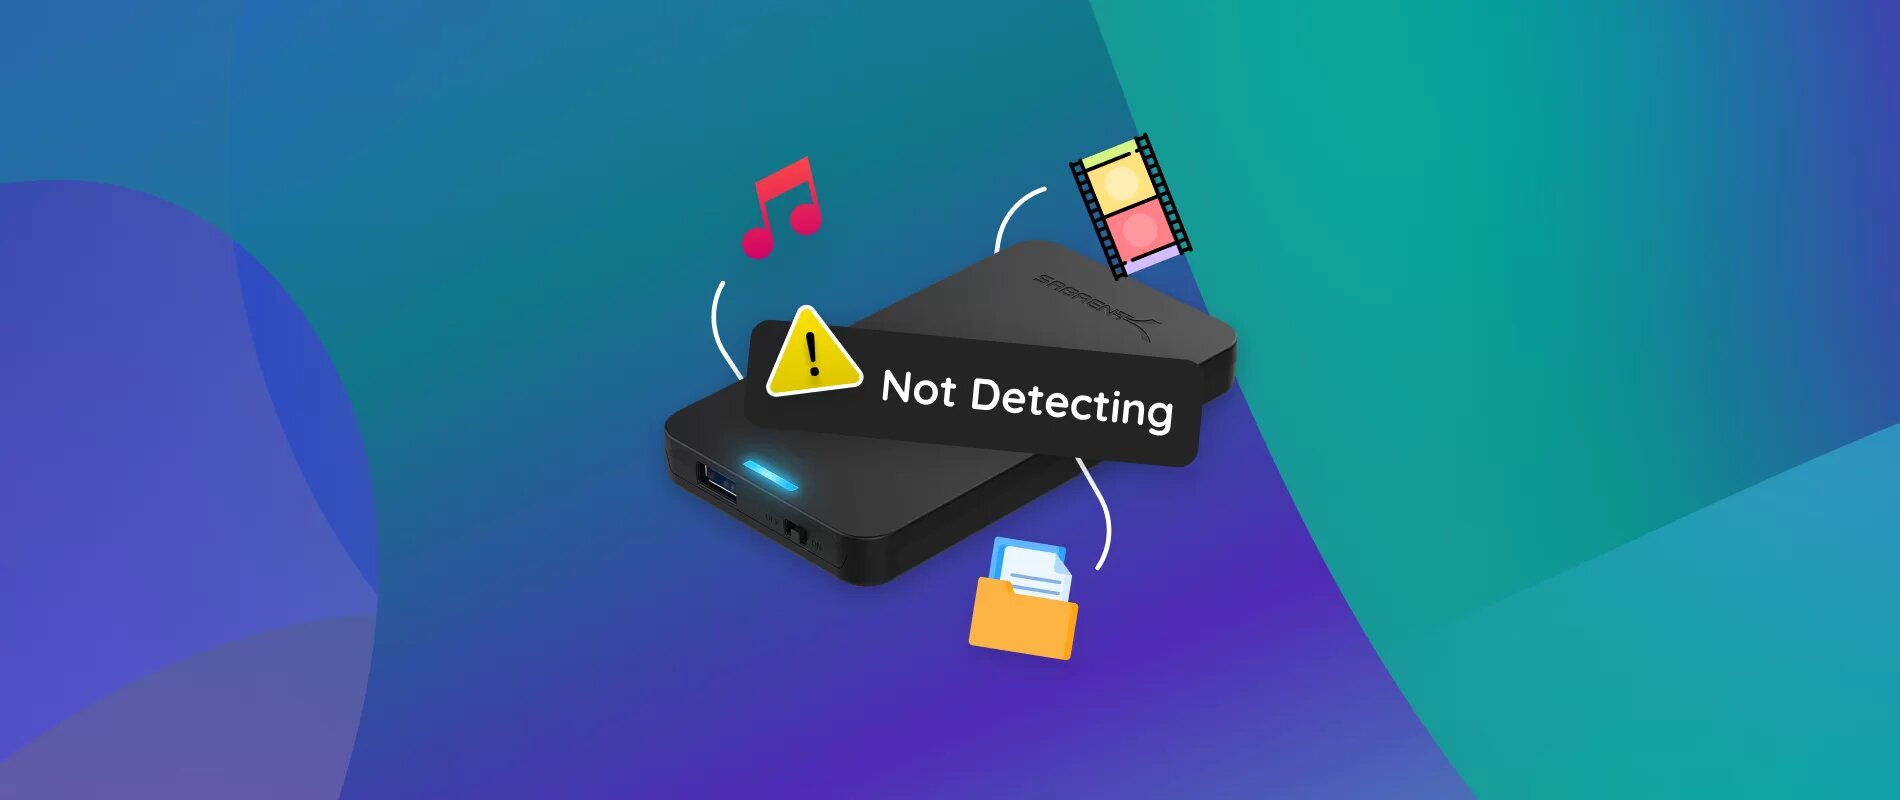 How To Recover External Hard Drive That Is Not Detected